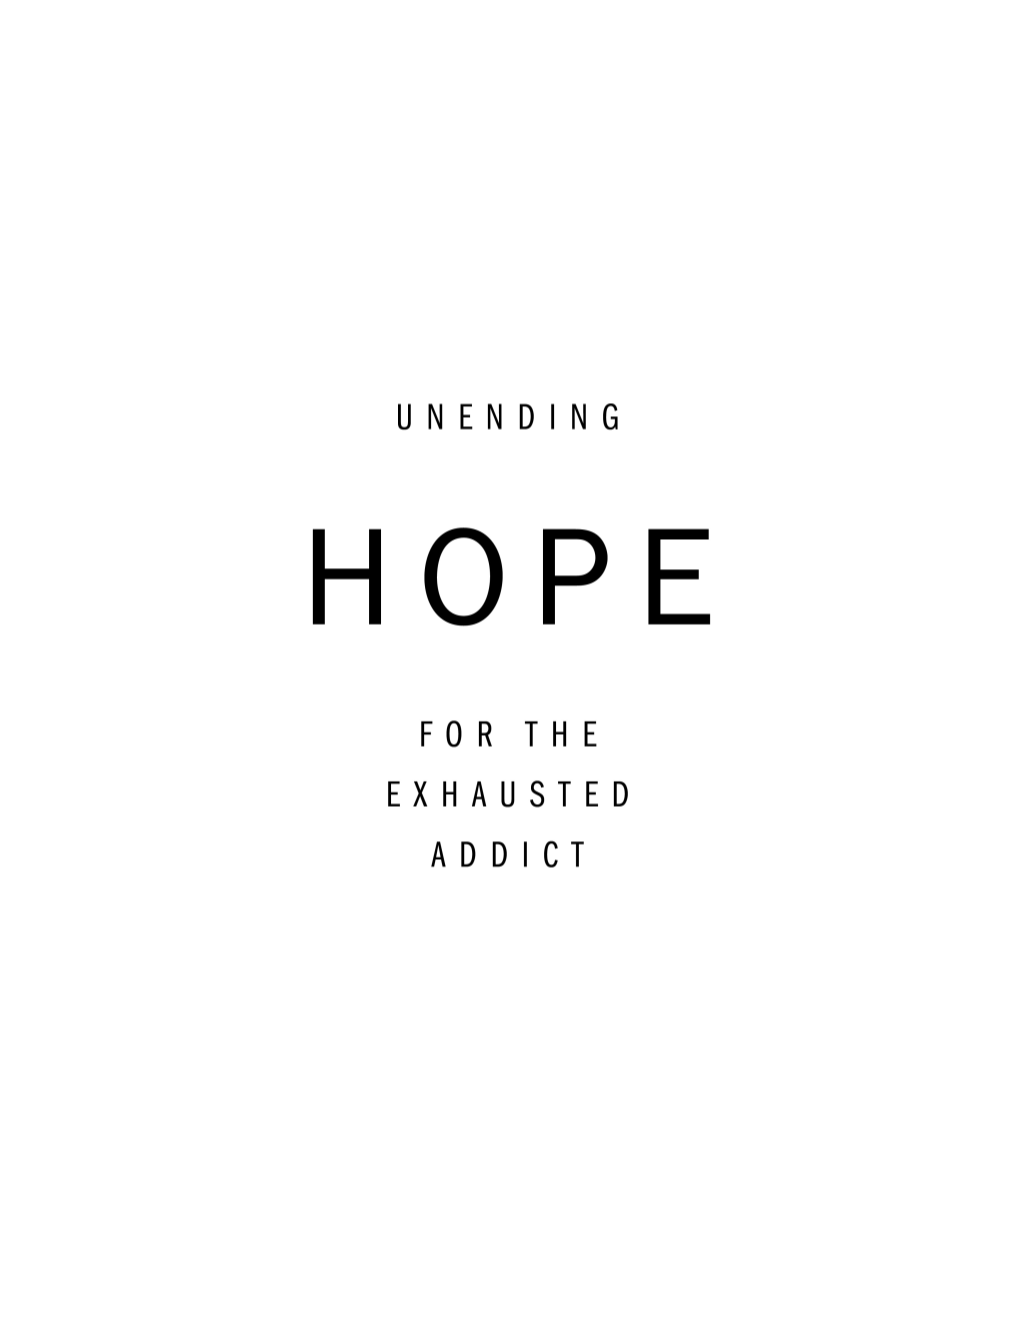 UNENDING HOPE for the EXHAUSTED ADDICT Wants to Be More Effective in Helping People to Put Off Their Enslavement to Drugs